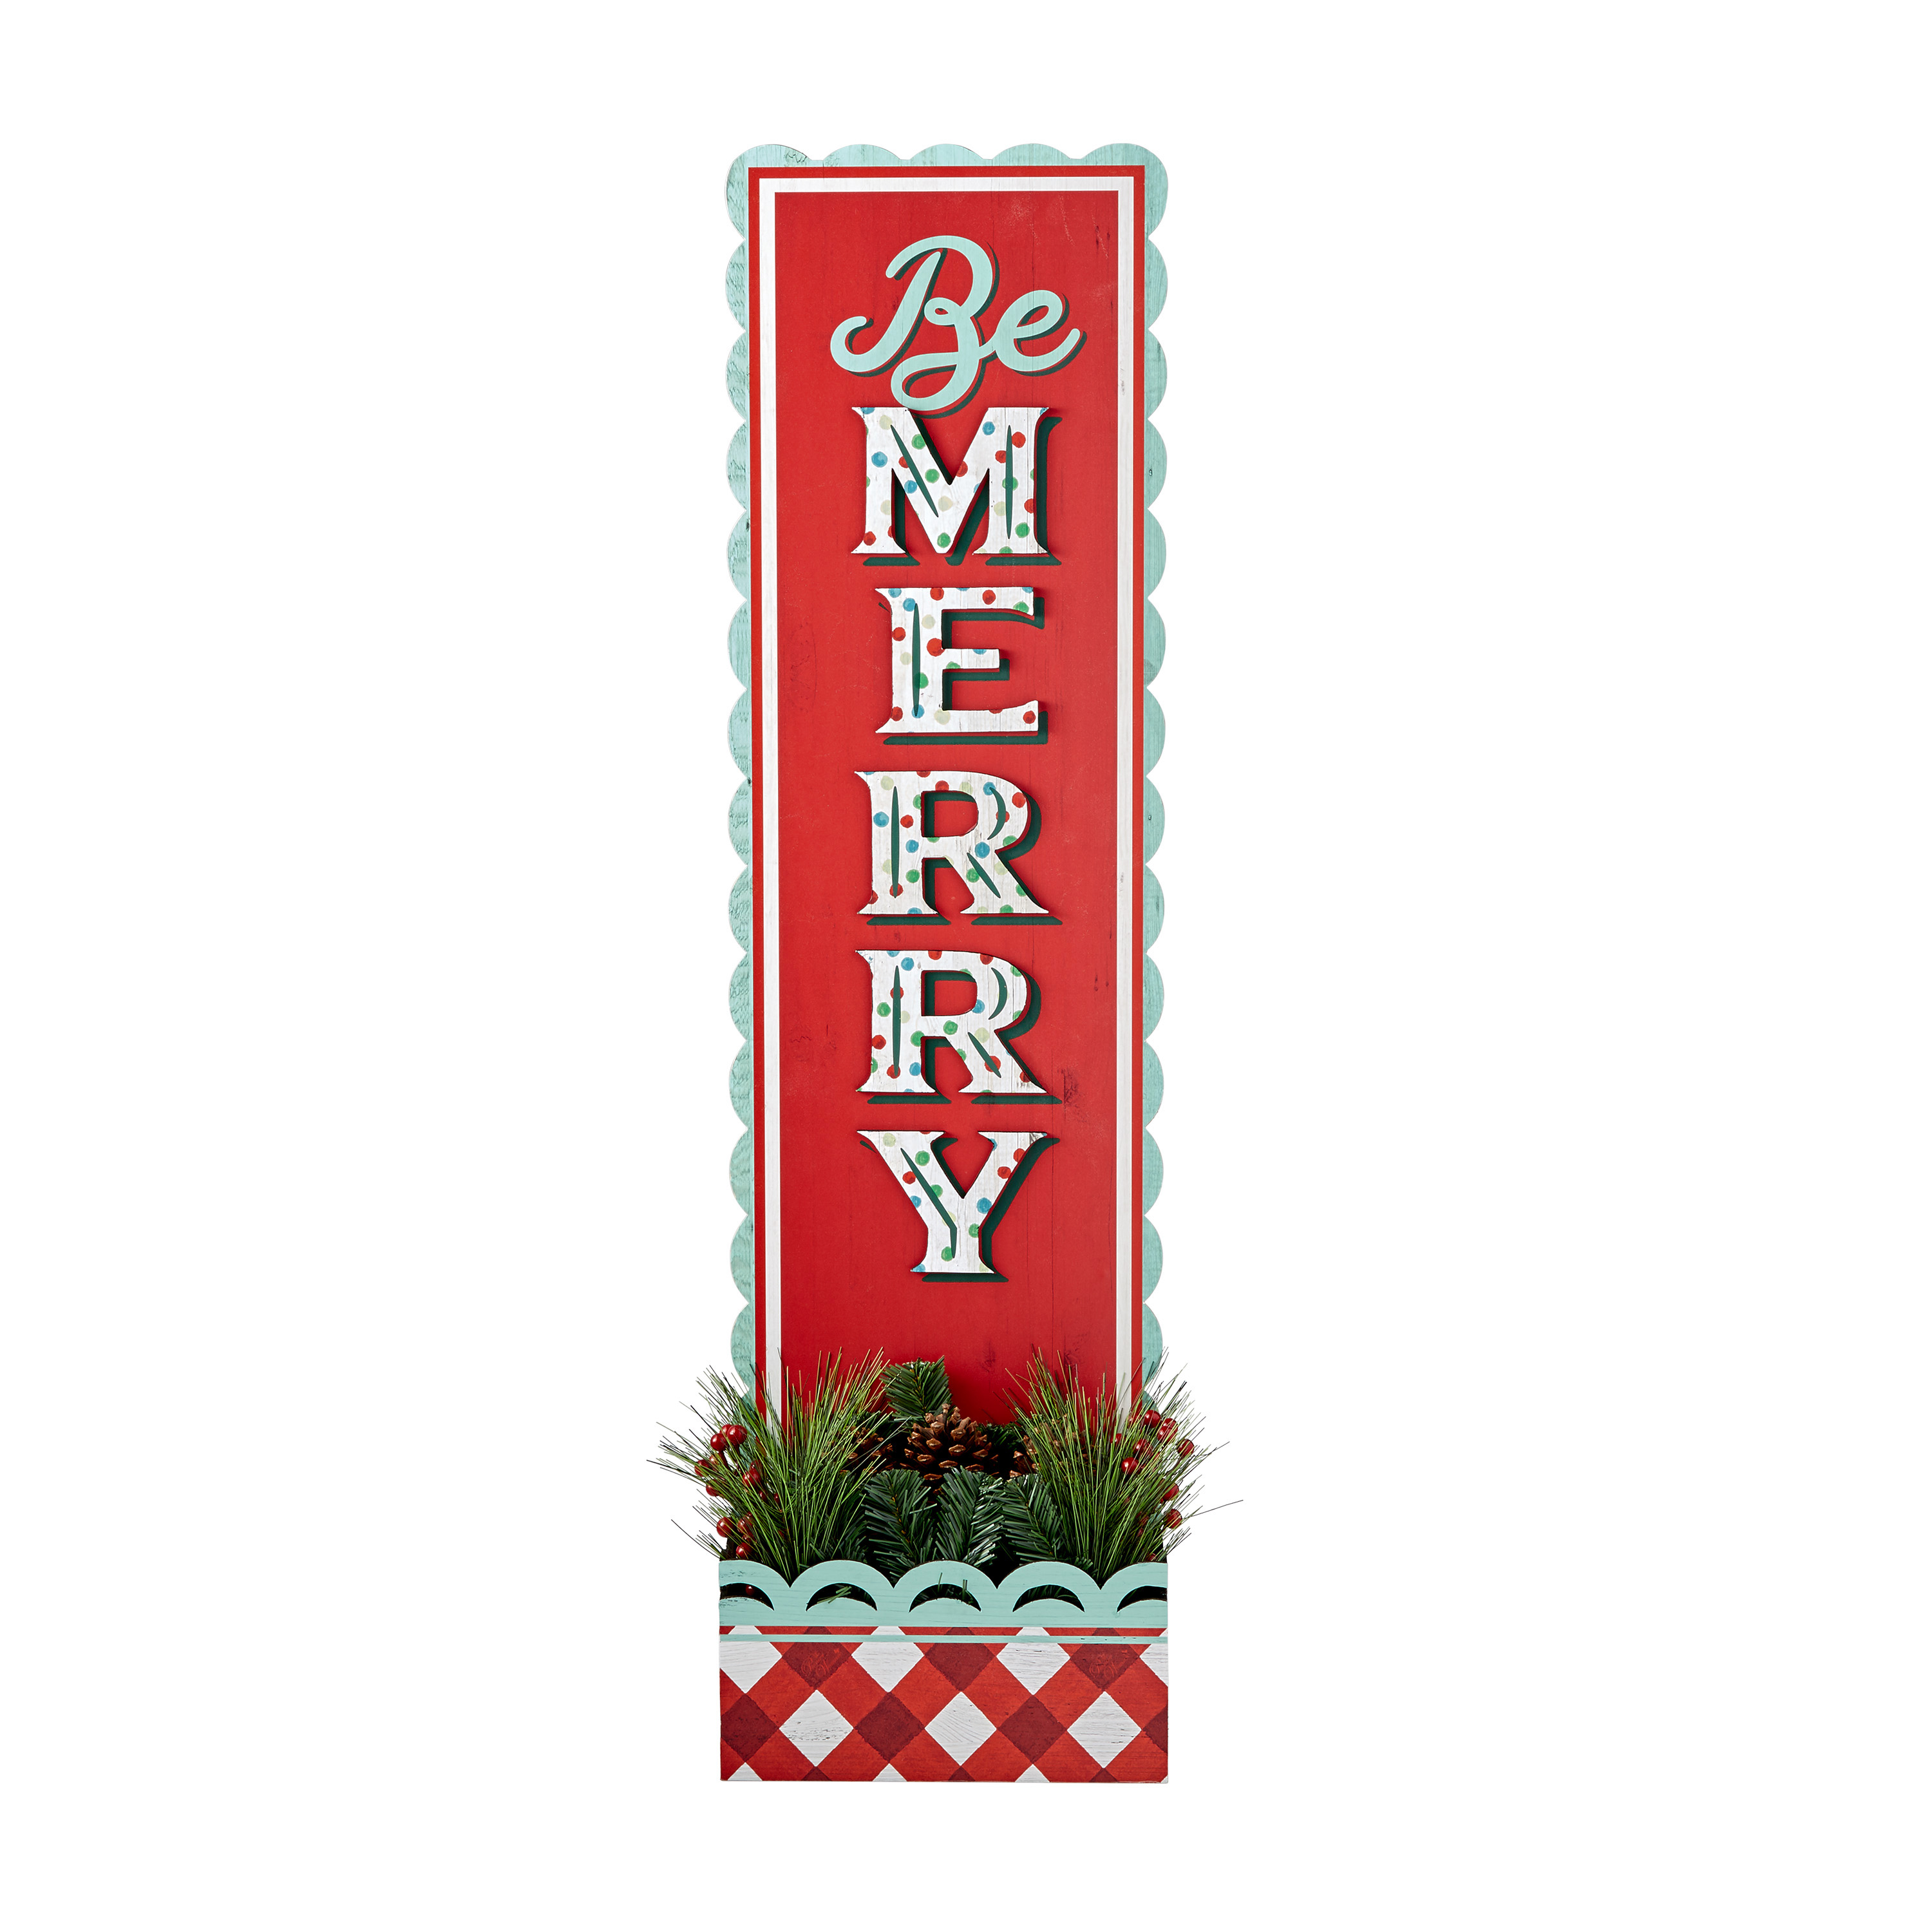 The Pioneer Woman Porch Sign, Be Merry - image 1 of 5